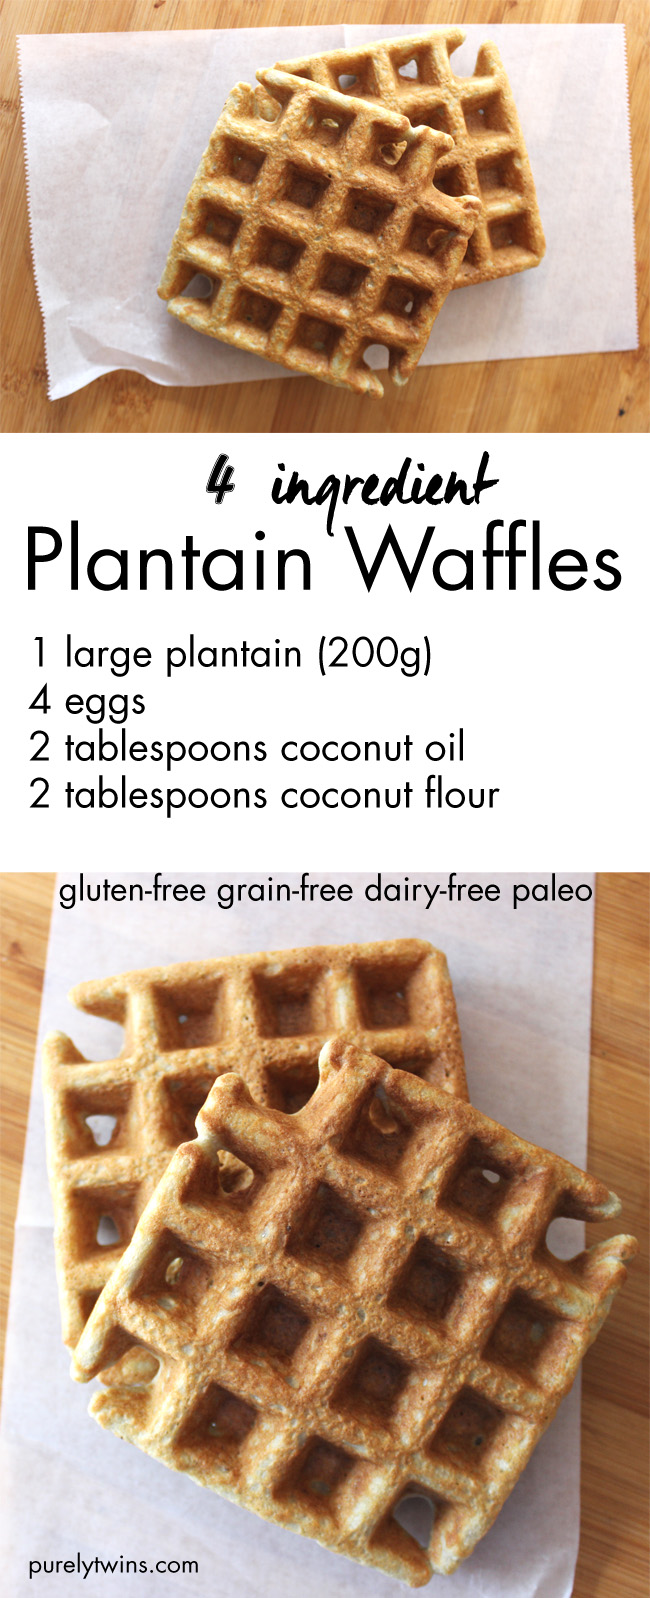 How to make grain-free gluten-free paleo plantain waffle recipe. Simple. Healthy waffles for everyday meal. |Purelytwins.com